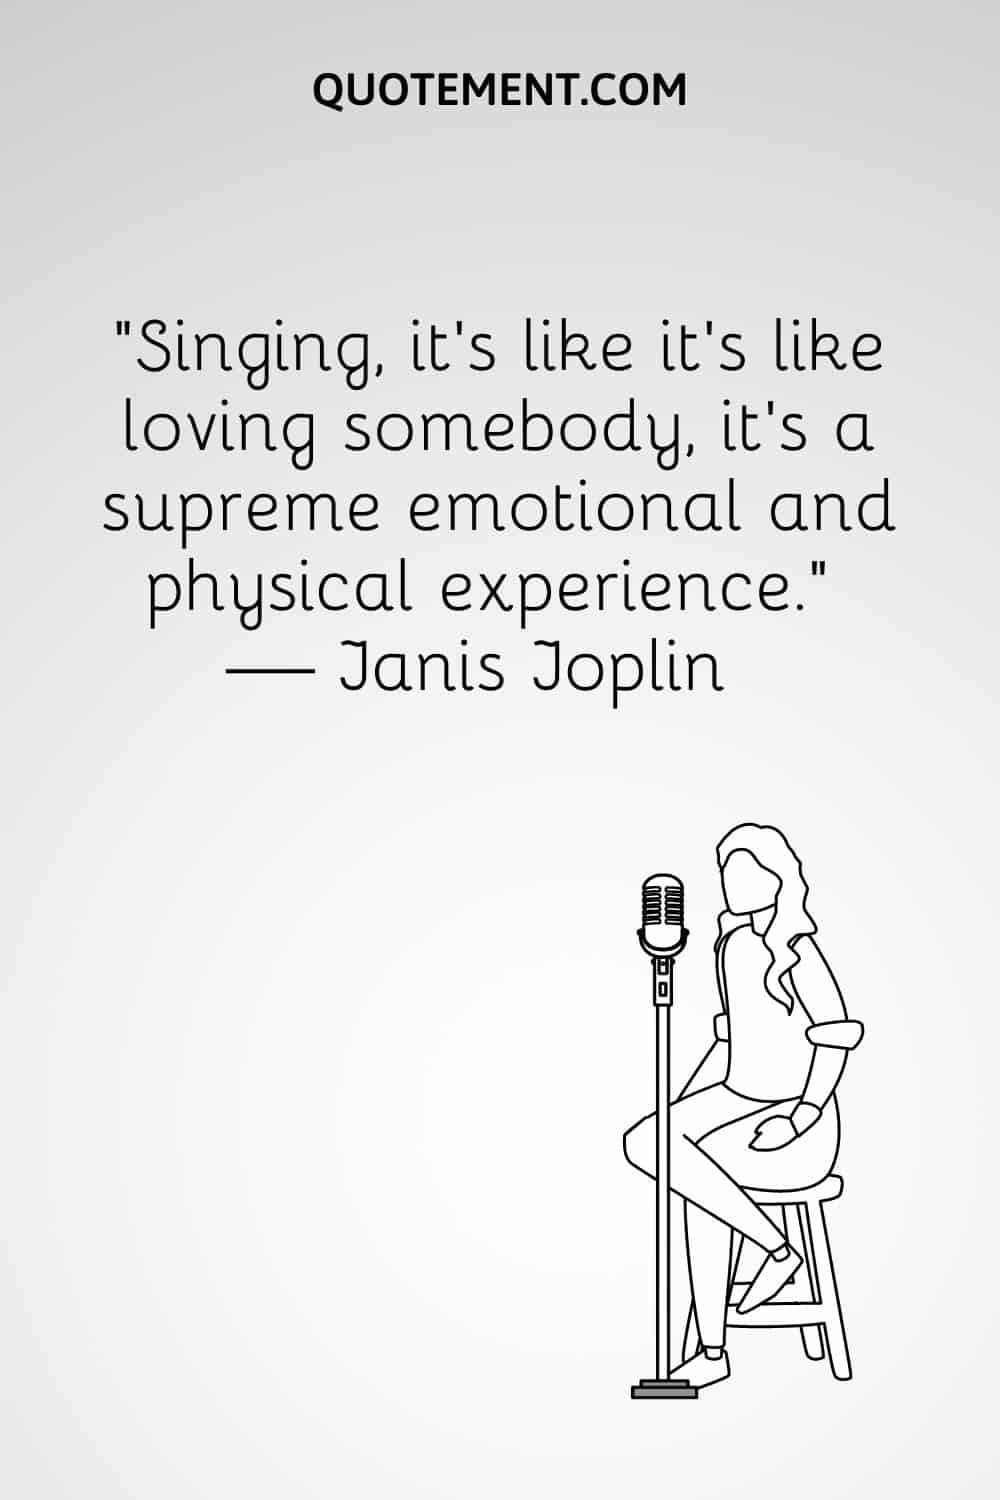 “Singing, it's like it's like loving somebody, it's a supreme emotional and physical experience.” — Janis Joplin